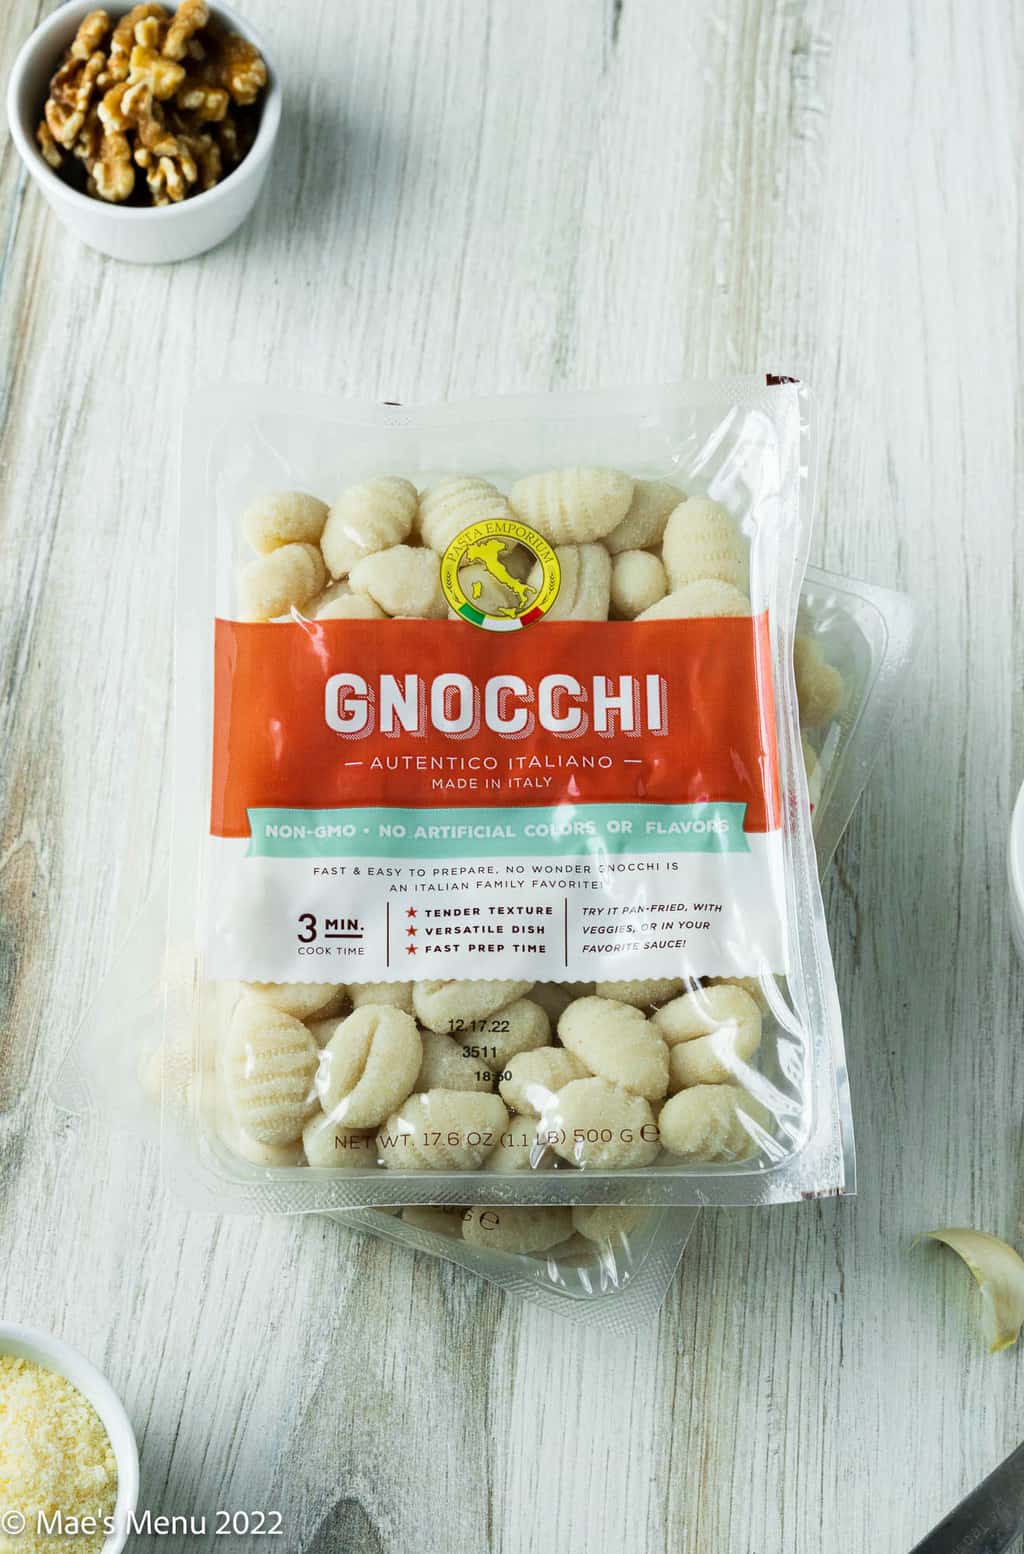 A package of potato gnocchi and small dish of walnuts.